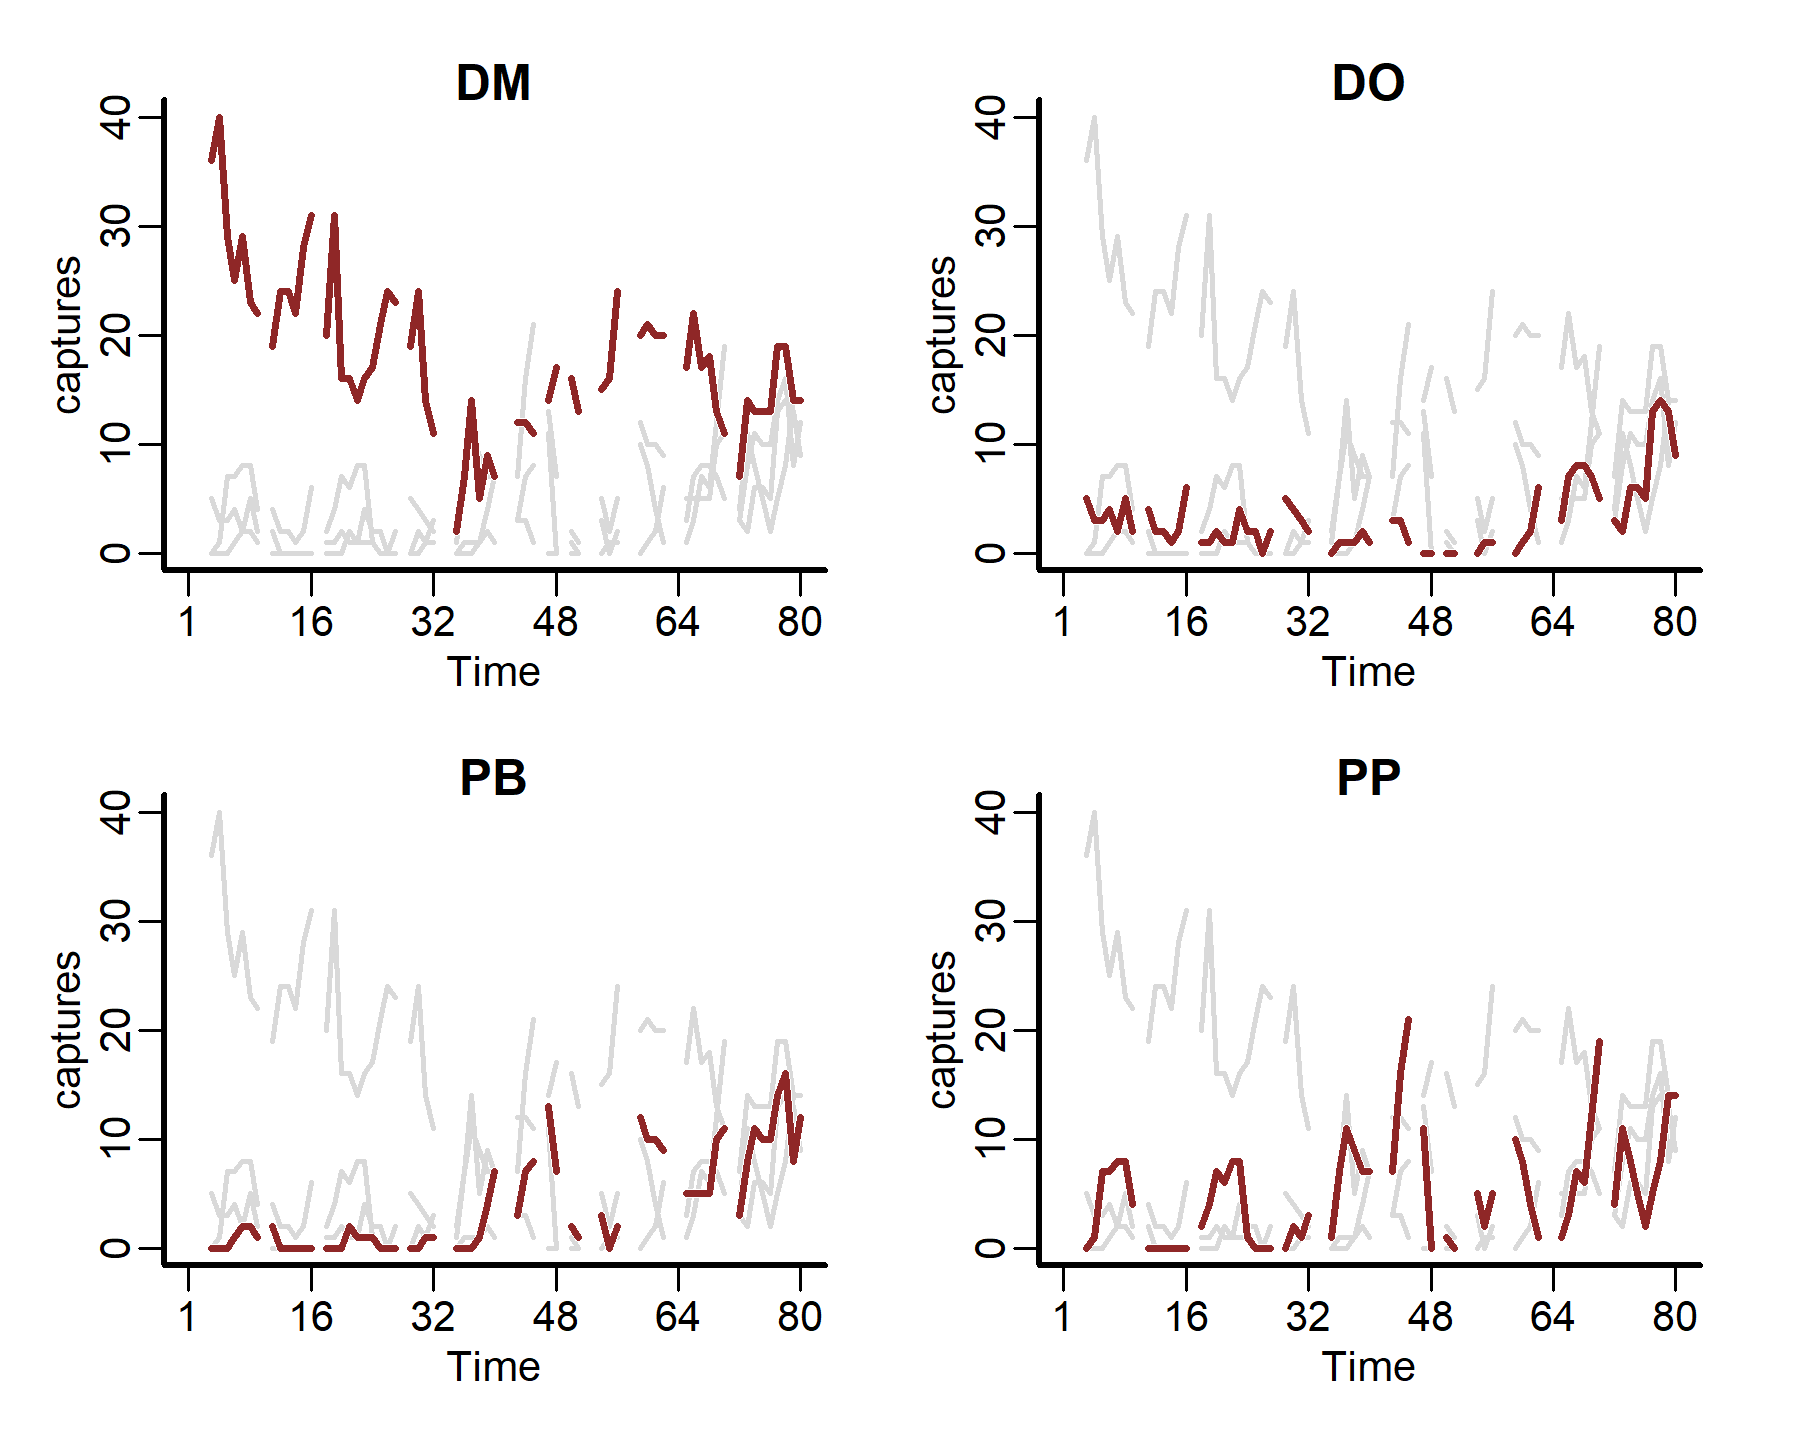 Visualising features of time series data in mvgam and R